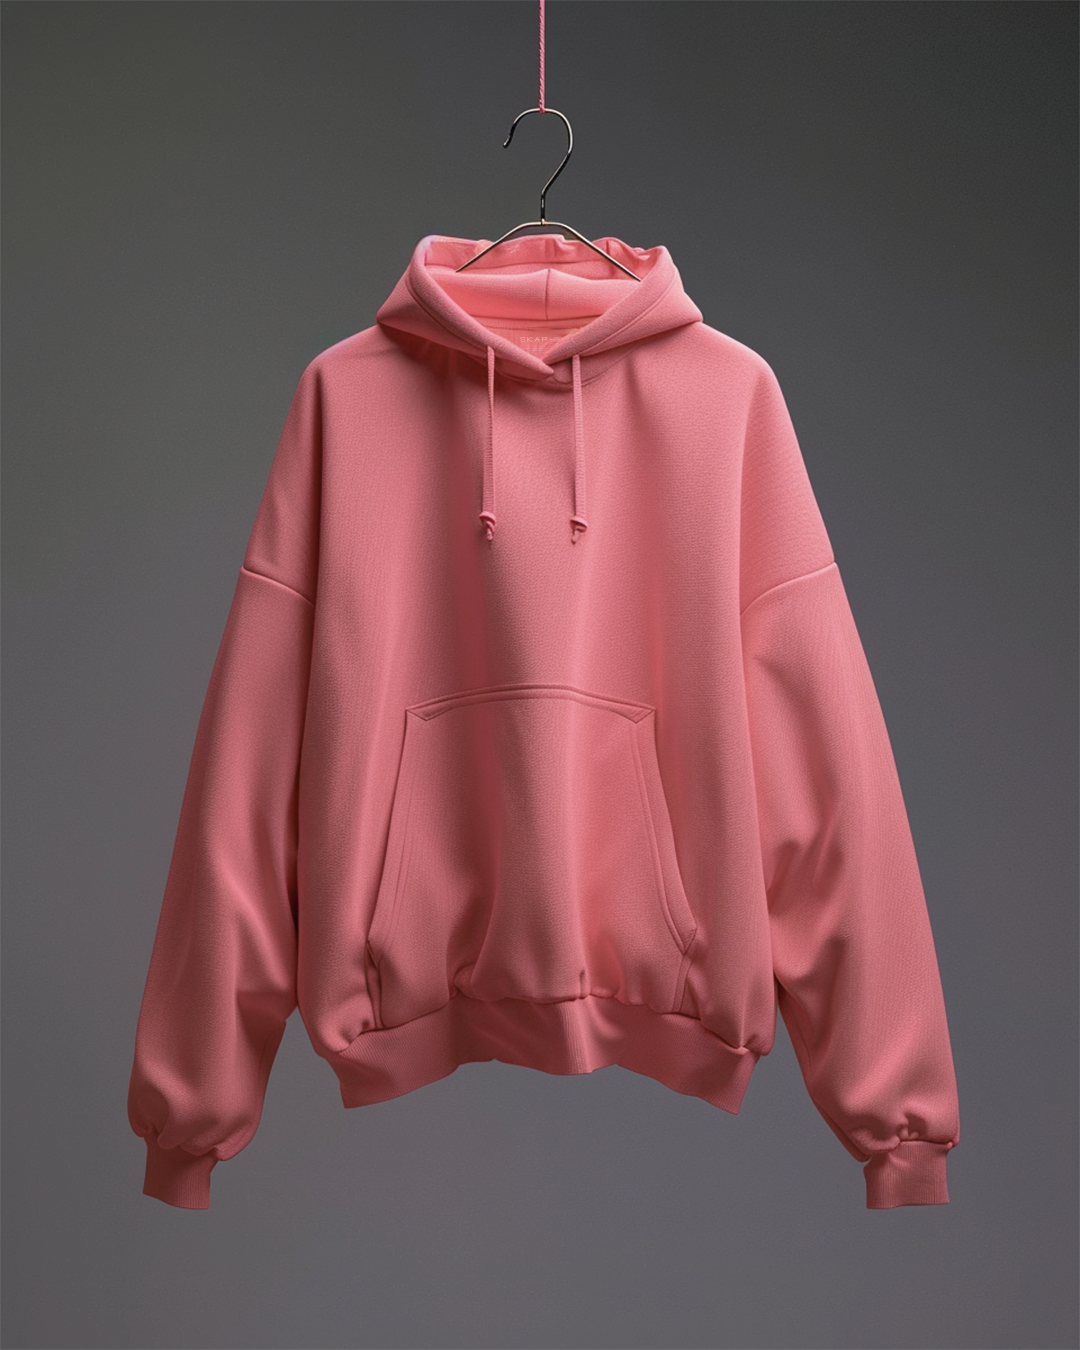 Blush Rose Oversized Hoodie & Lounge Pants Co-Ords